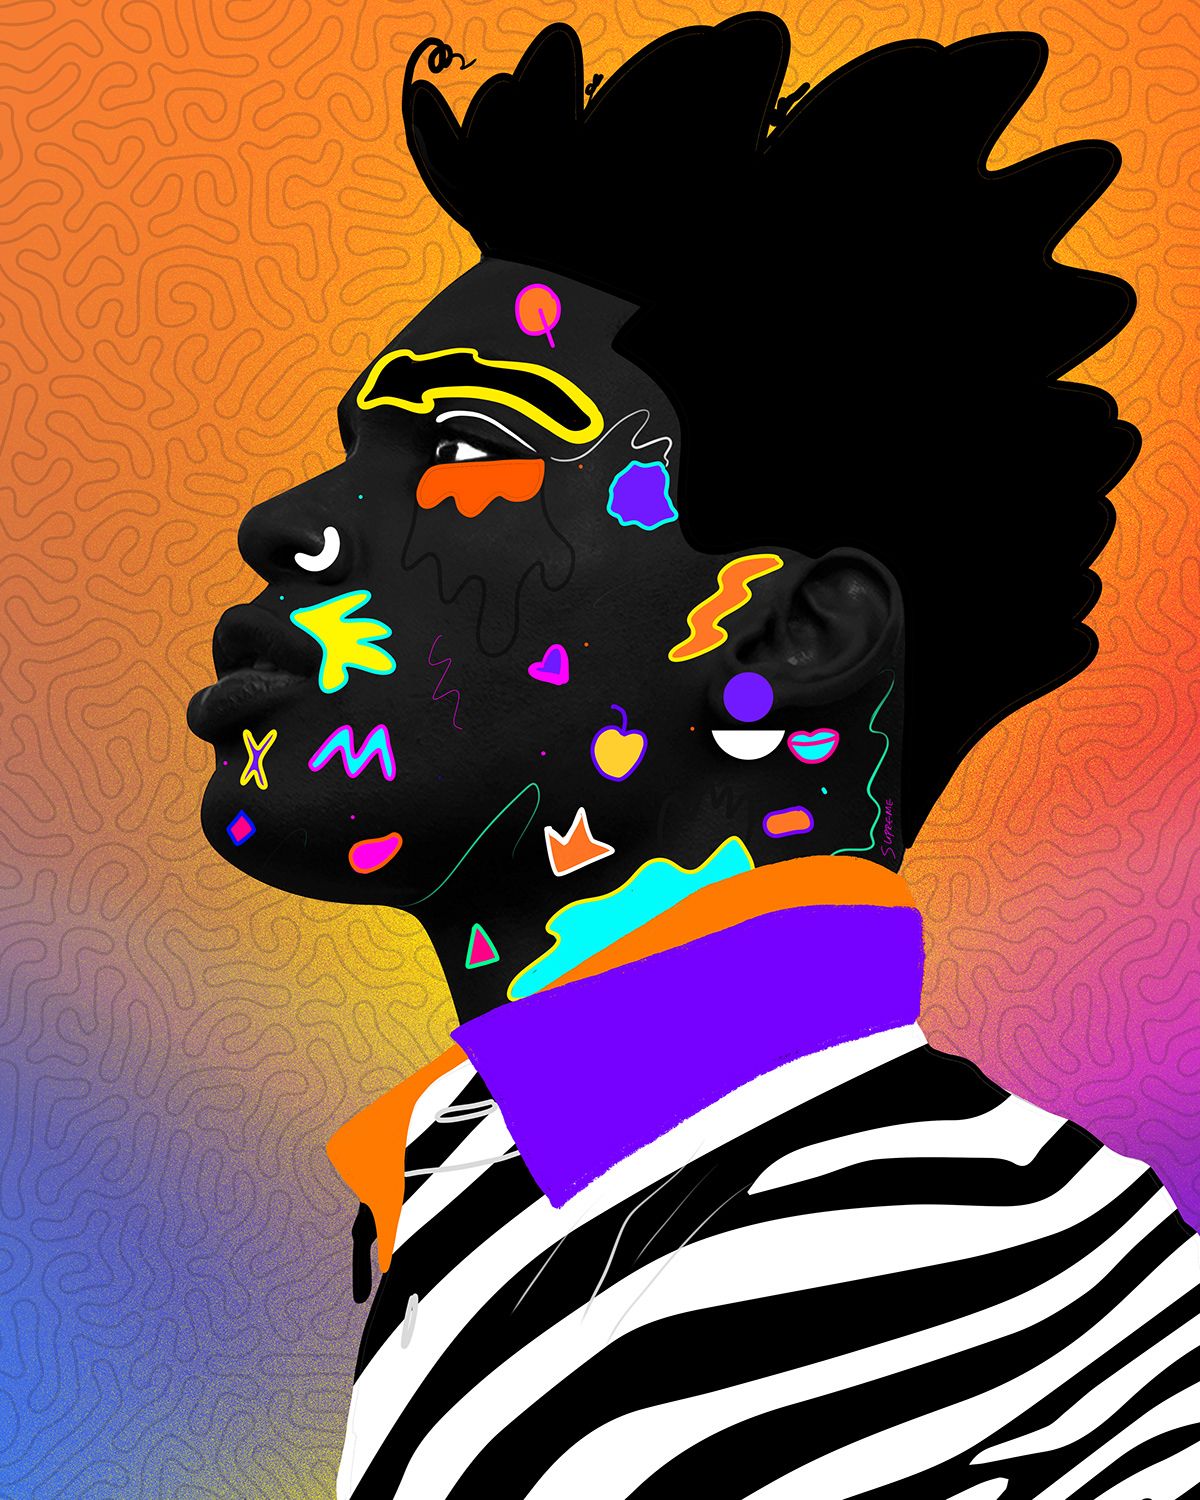 Colorful portrait series by Temi Coker on Inspirationde